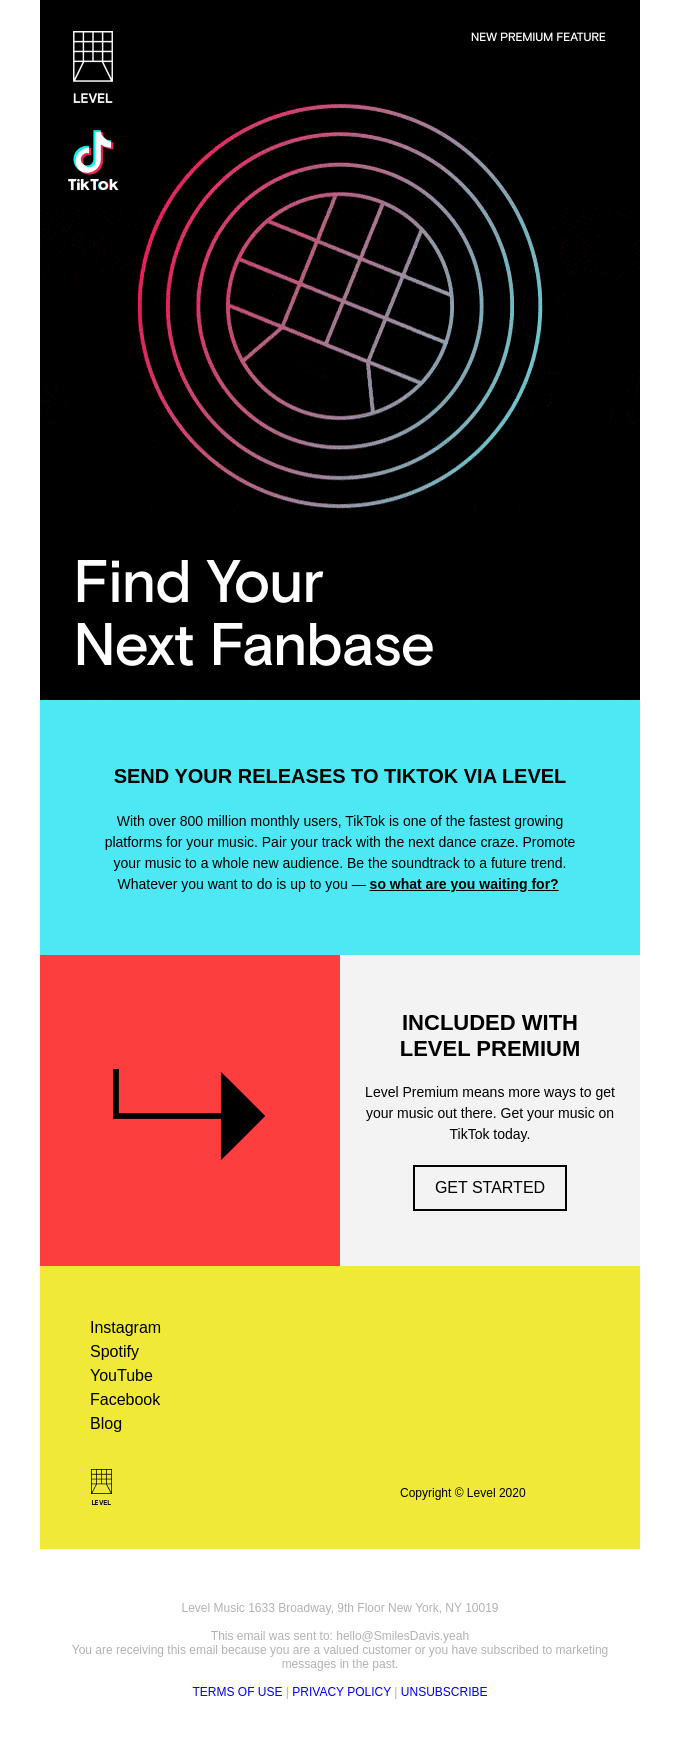 Find your next fanbase – Level gets your music on TikTok